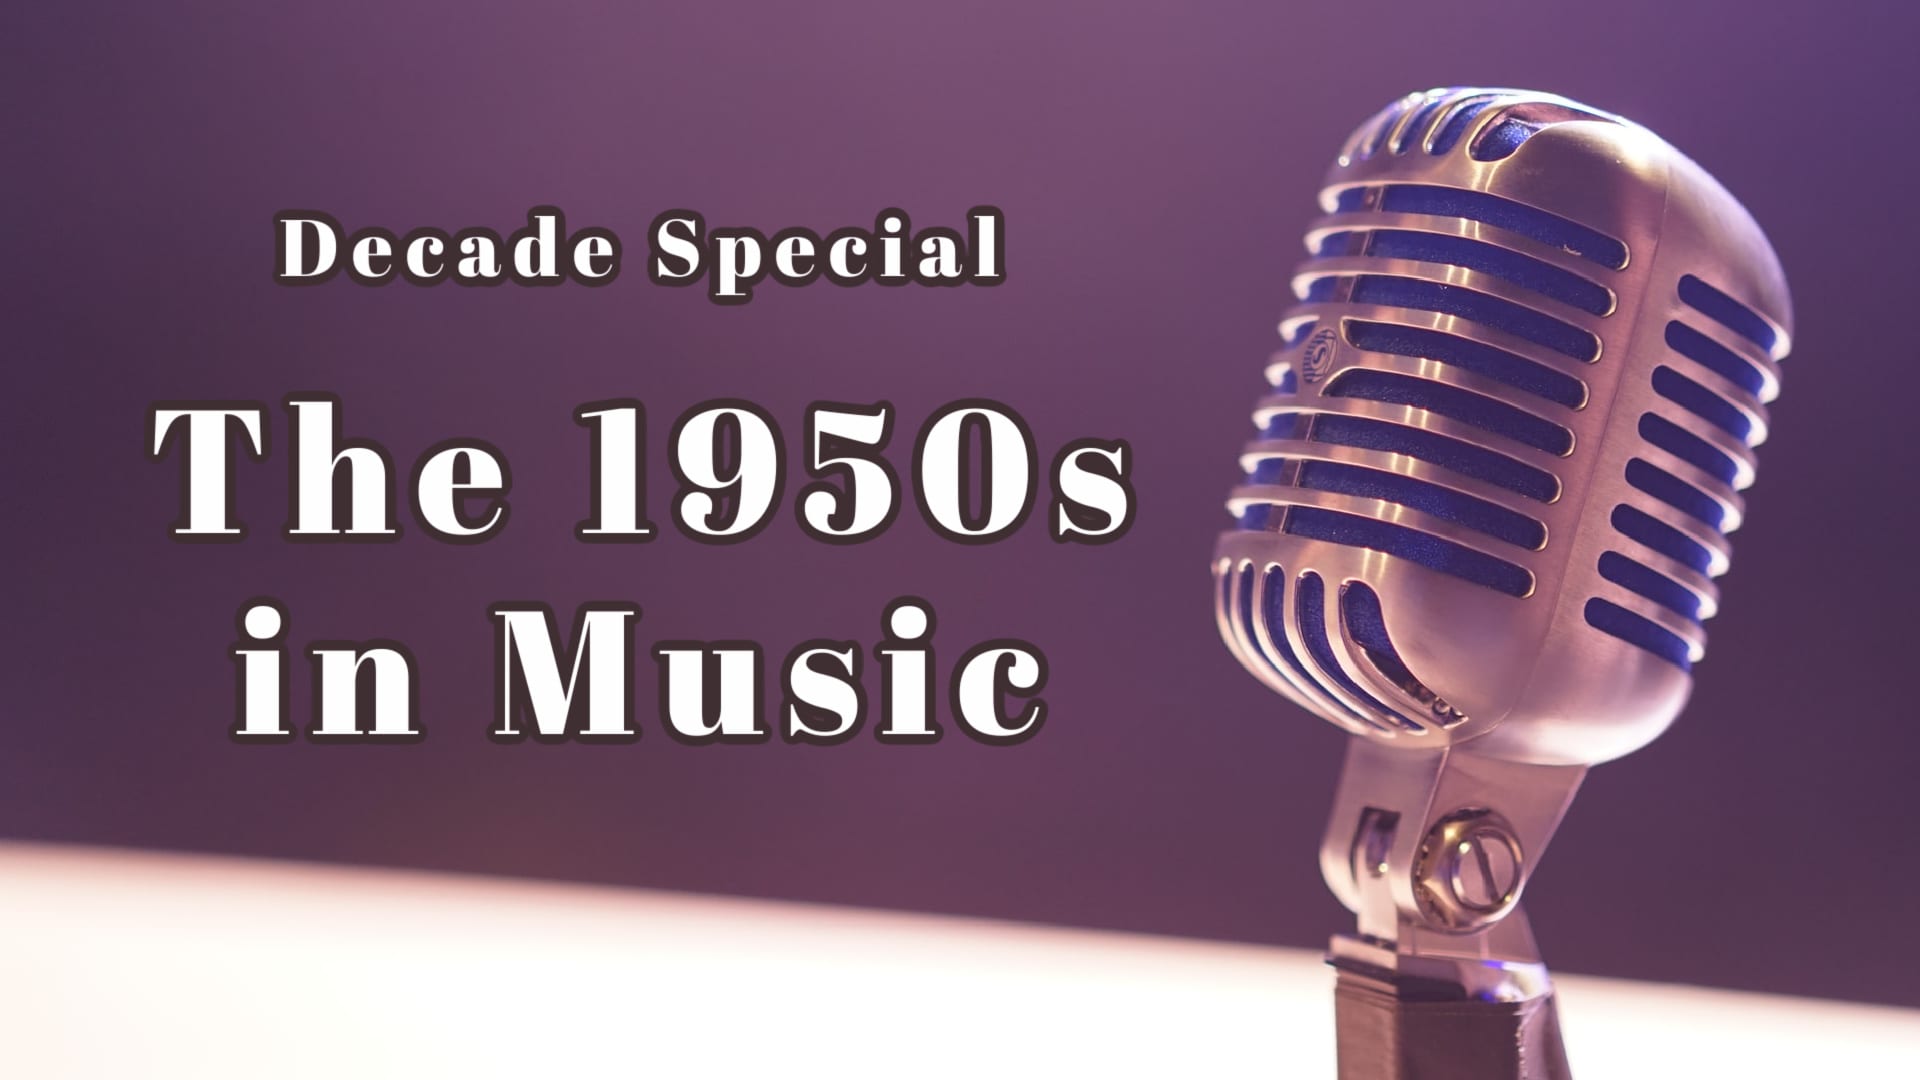 Decade Special: The 1950s in Music